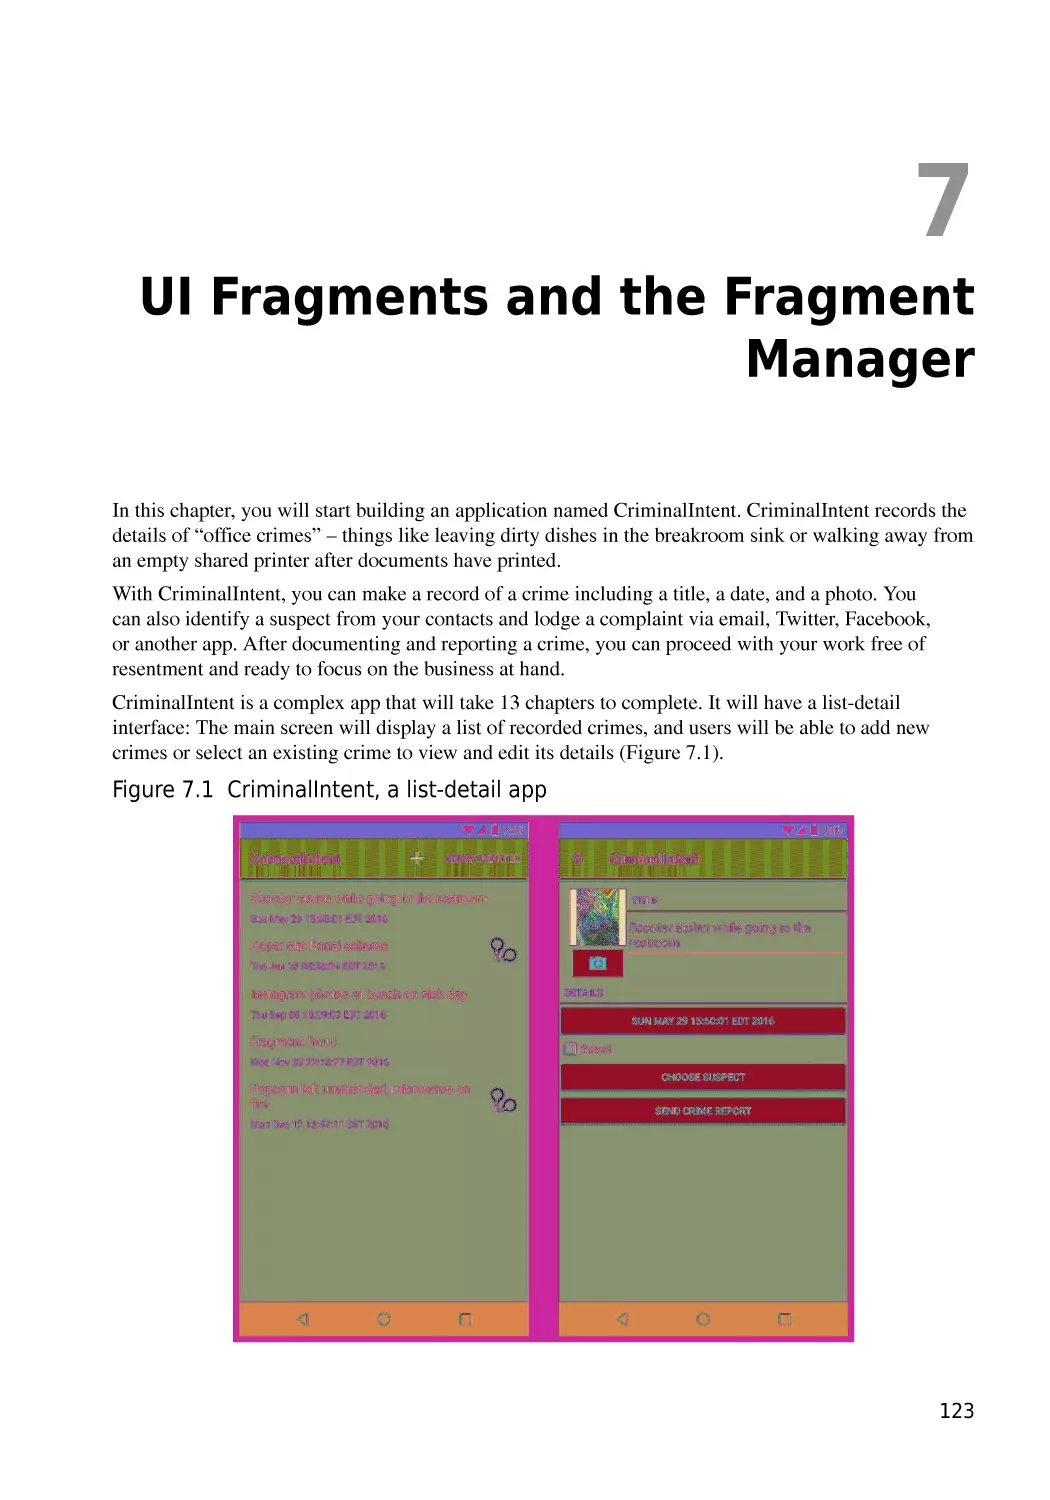 Chapter 7  UI Fragments and the Fragment Manager